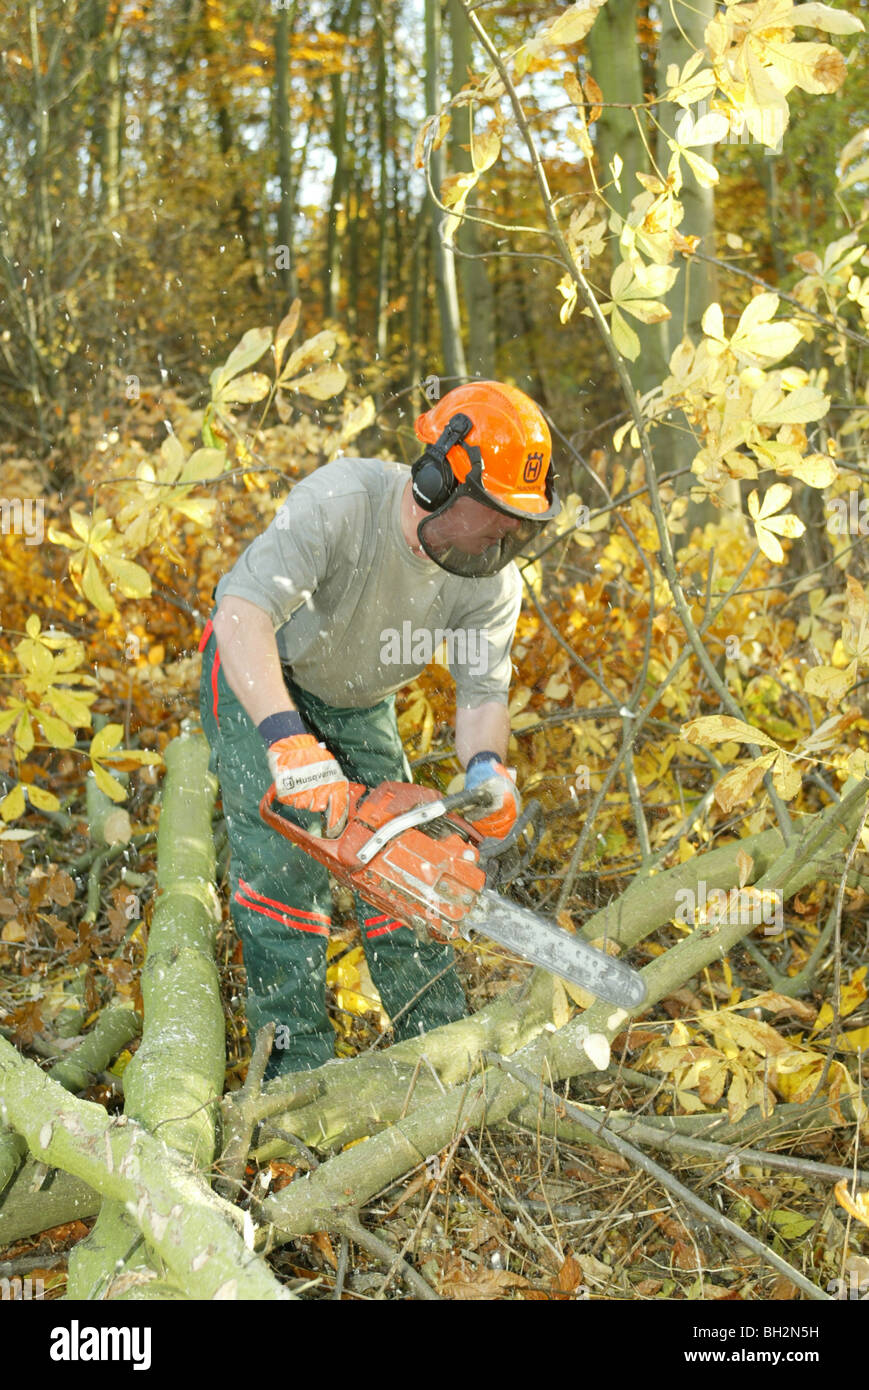 Forestry worker using a chainsaw Stock Photo